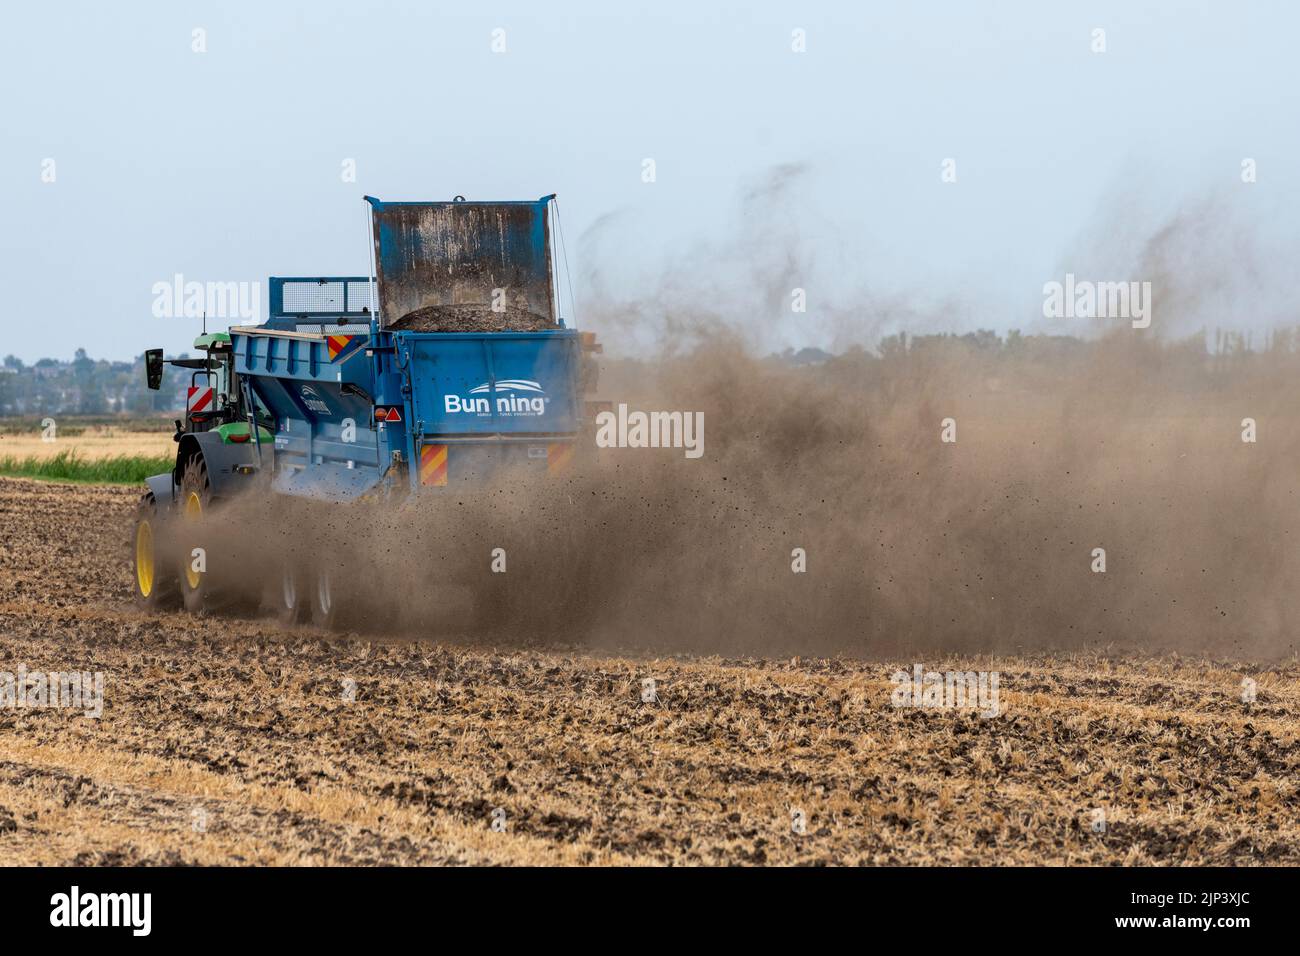 Aldreth, Cambridgeshire, UK. 15th Aug, 2022. A farmer spreads lime on an arable field making the most of the dry weather before thunder storms and rain are forecast across much of the UK. The arid conditions causes dust to fly and the UK weather is forecast to cool down with periods of rain. Credit: Julian Eales/Alamy Live News Stock Photo